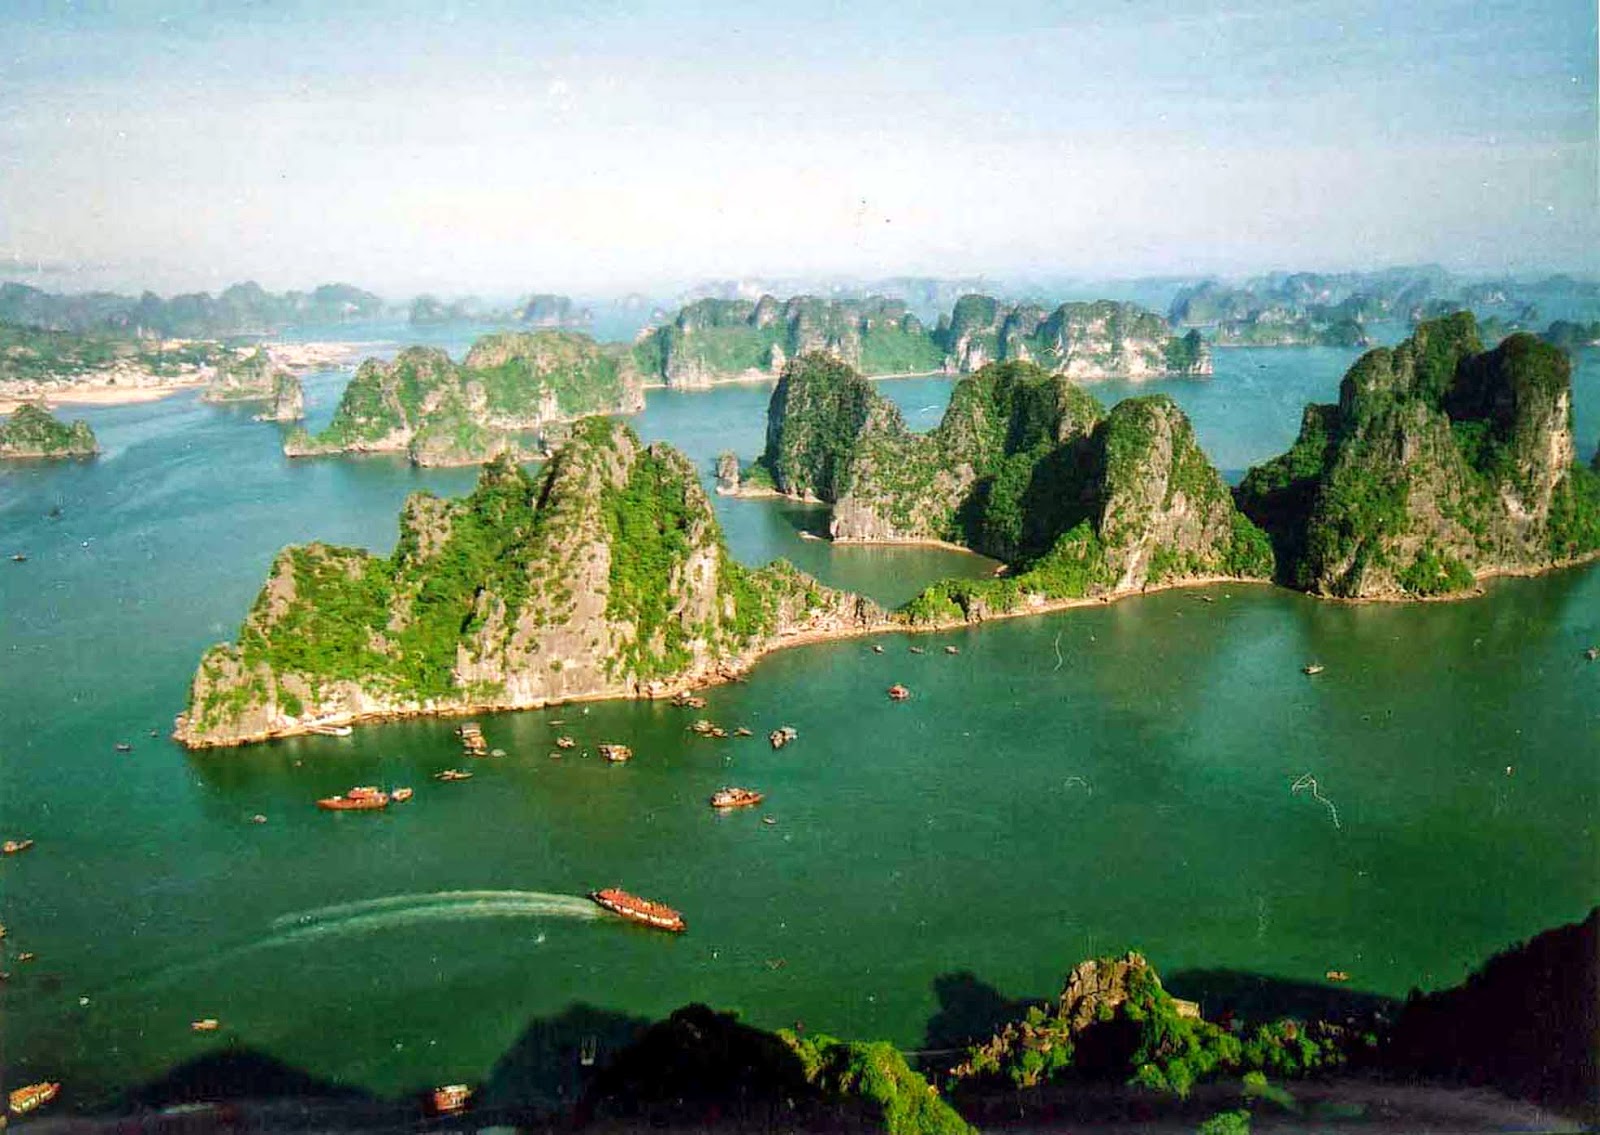 Limestone pillars rising out of the emerald-green waters of Ha Long Bay